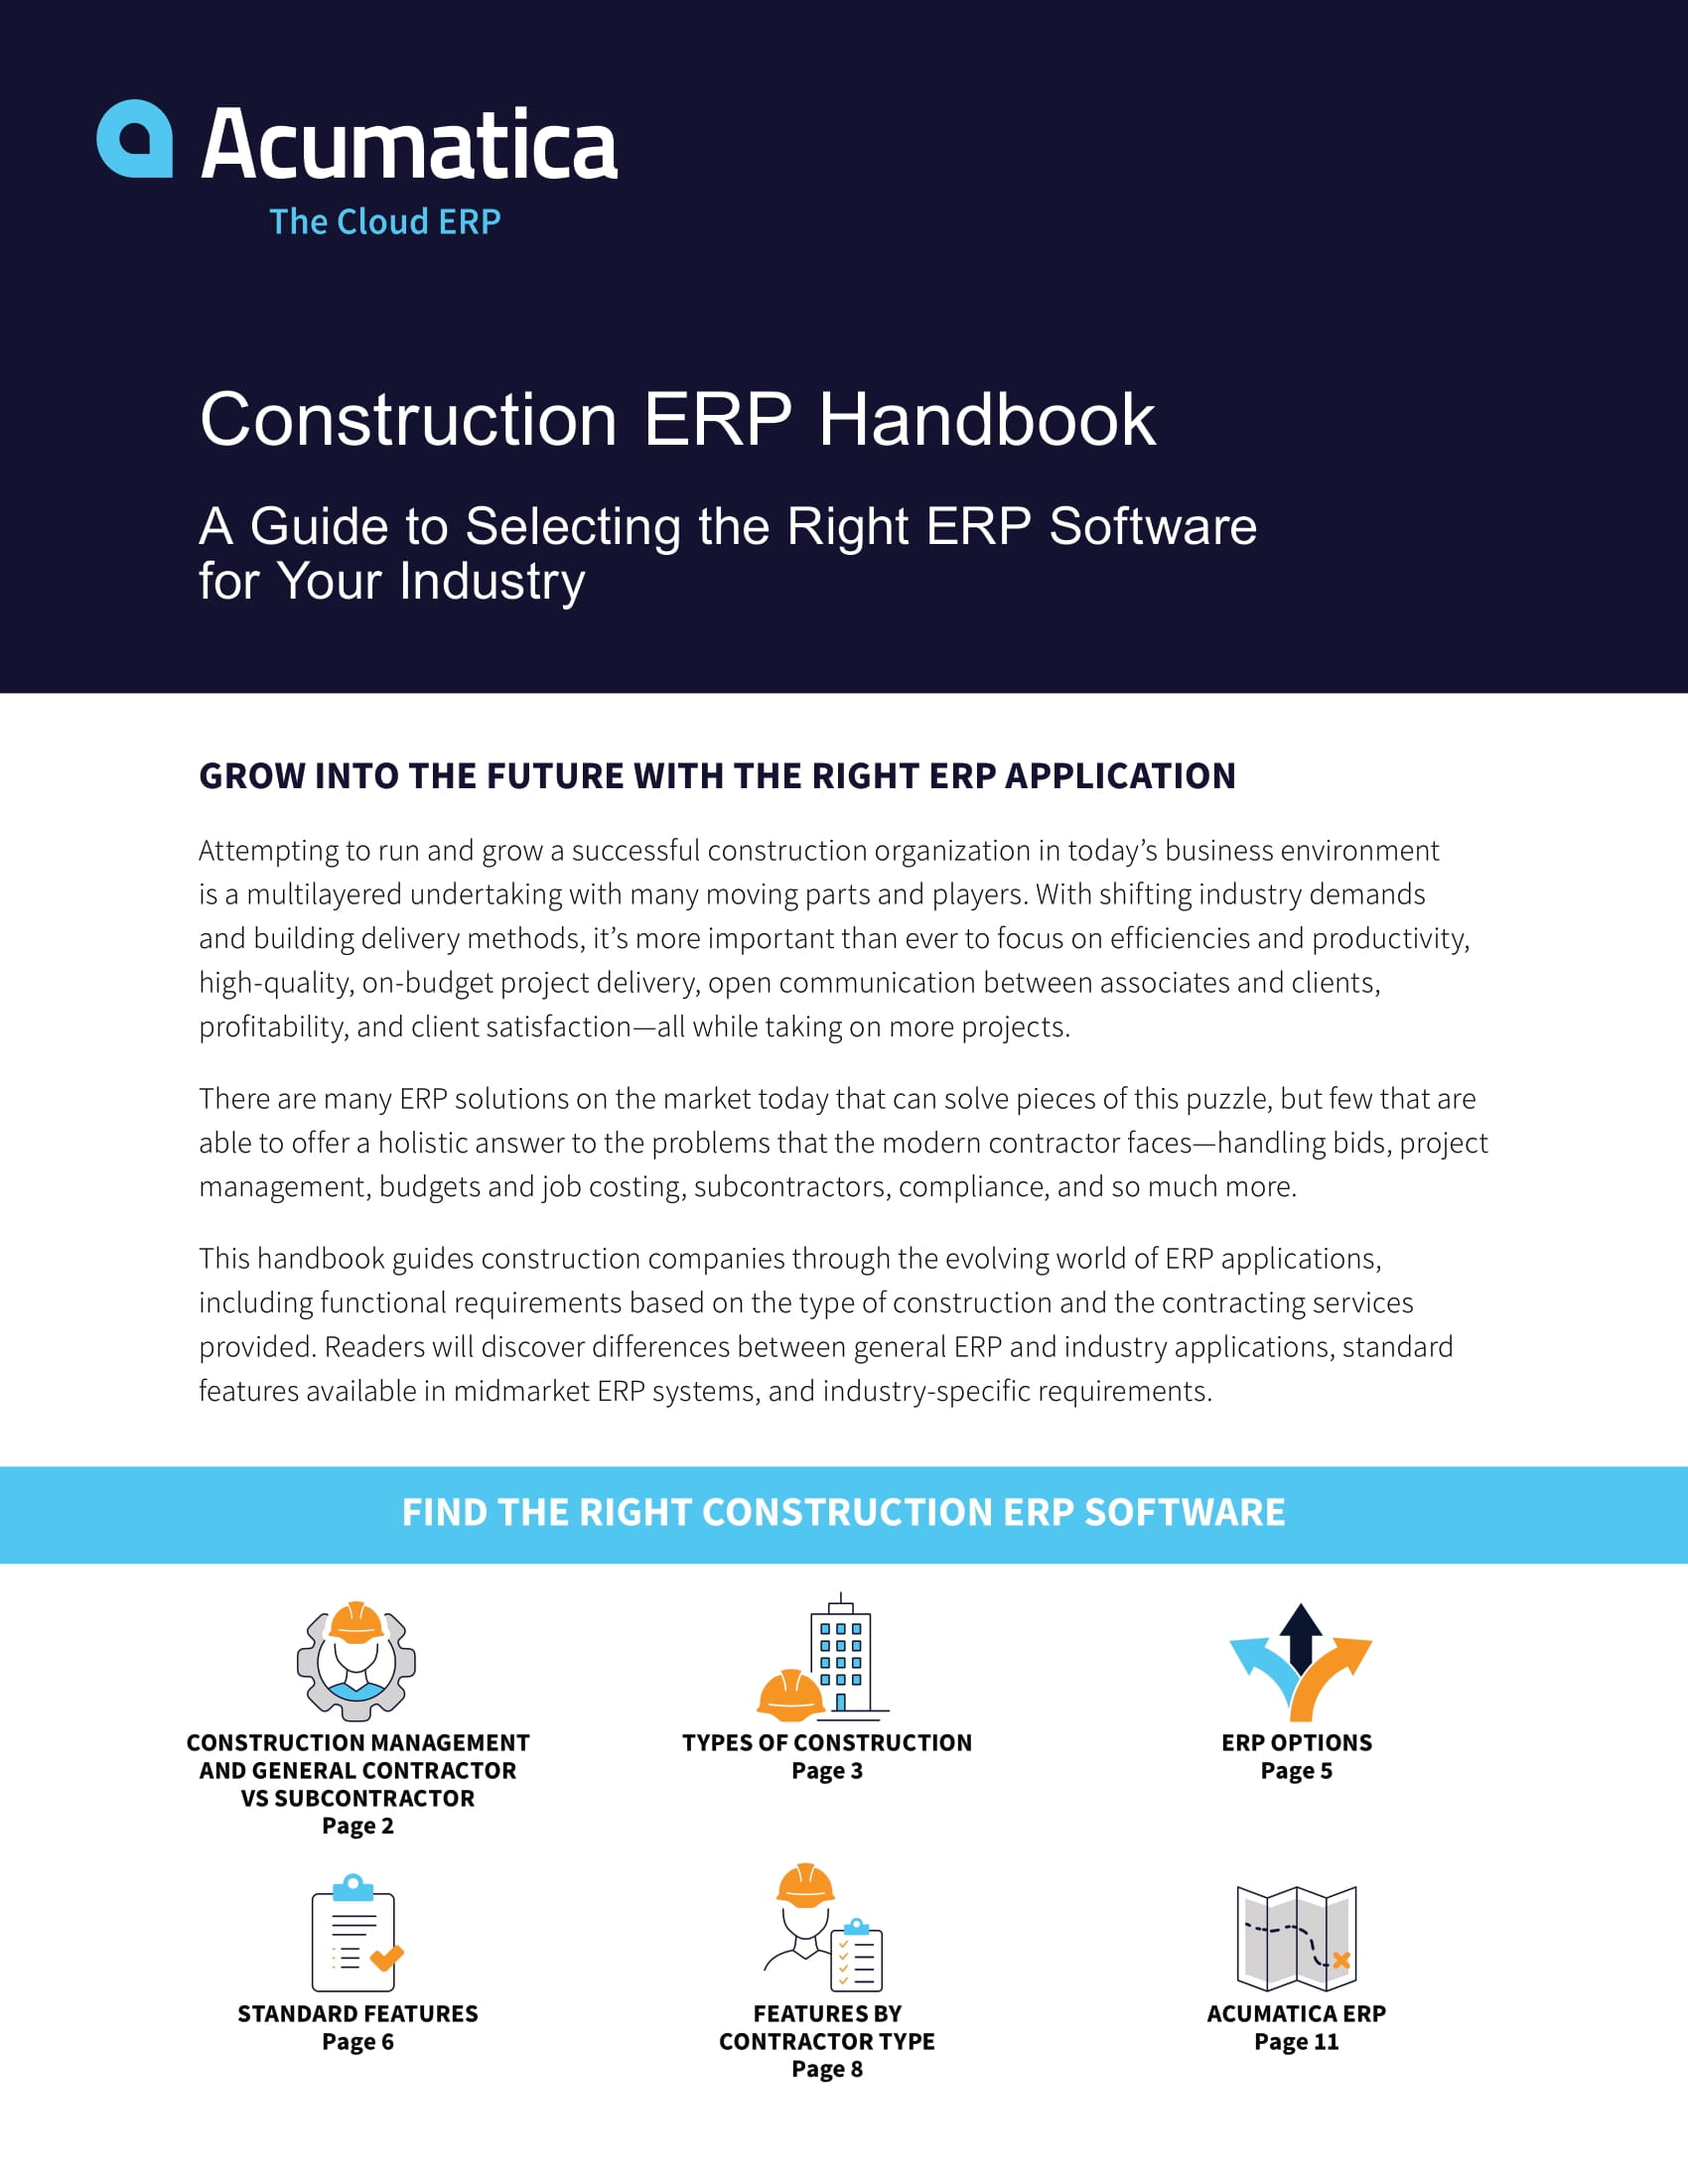 Stop Sifting Through the Many: Find the One Construction ERP Solution for Your Business Today